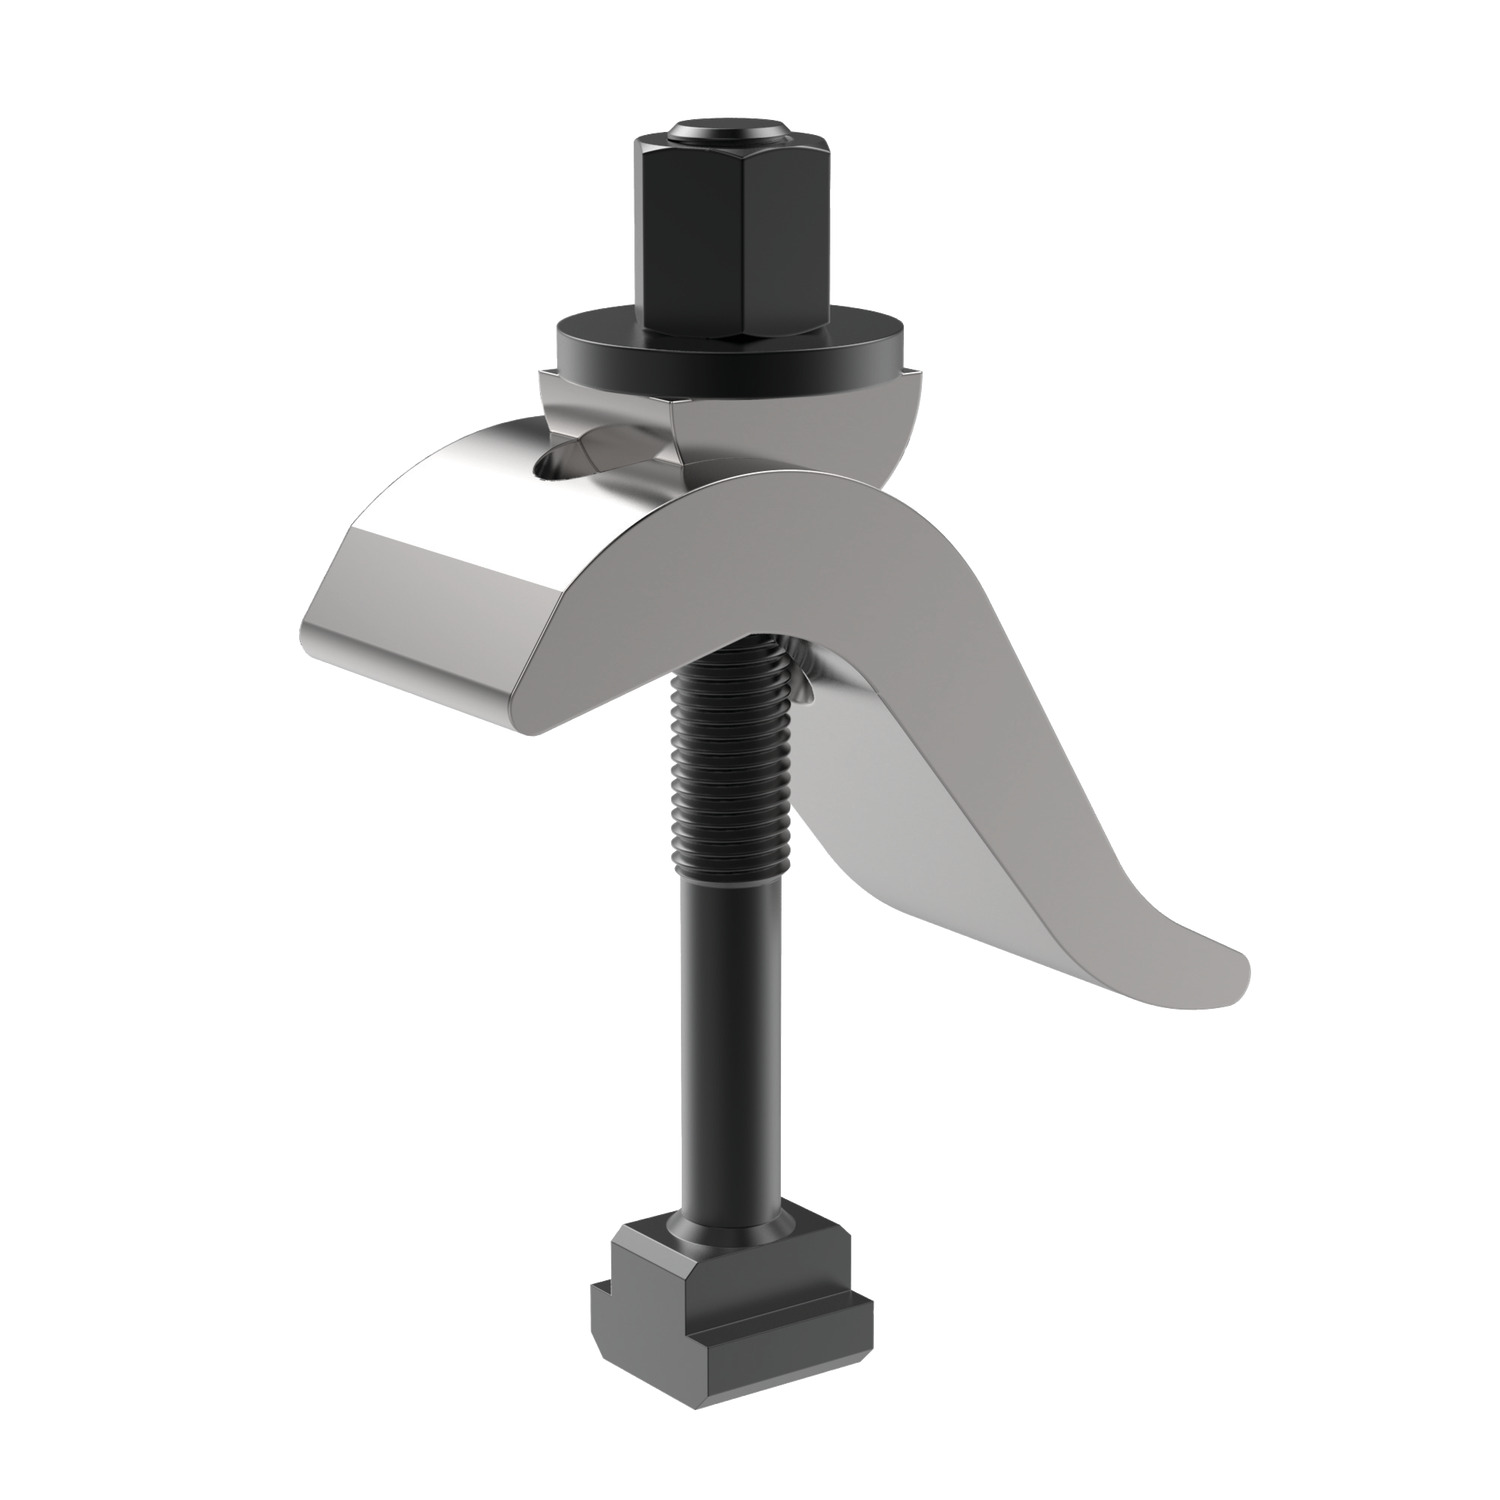 Stepless Adjustable Clamps The more traditional type of clamps for manual workholding solutions with a varied range. Some of the range include; plain clamps, forked clamps and fingers clamps.